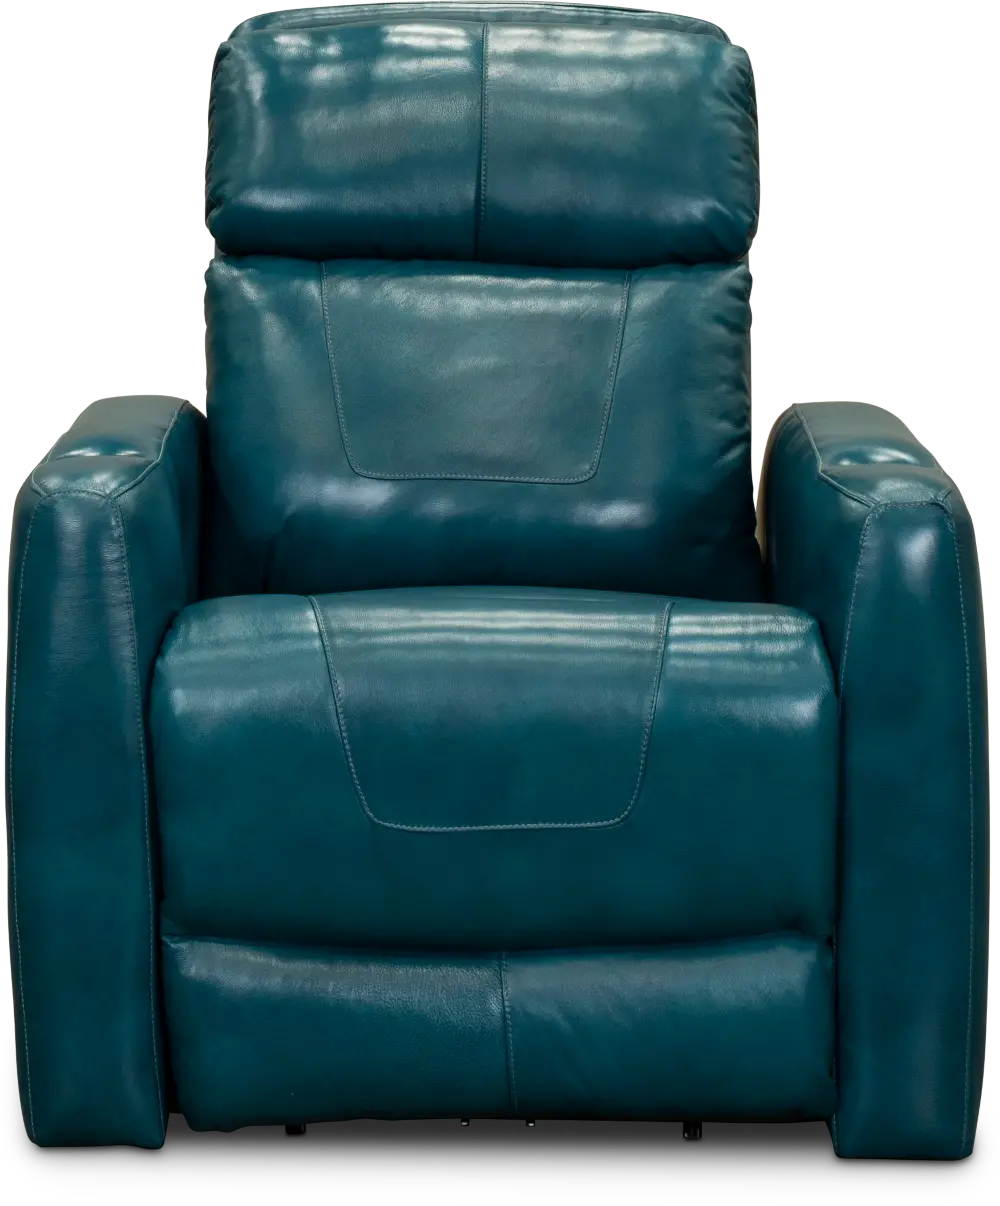 Peacock Turquoise Blue Leather-Match Power Recliner - Premier-1